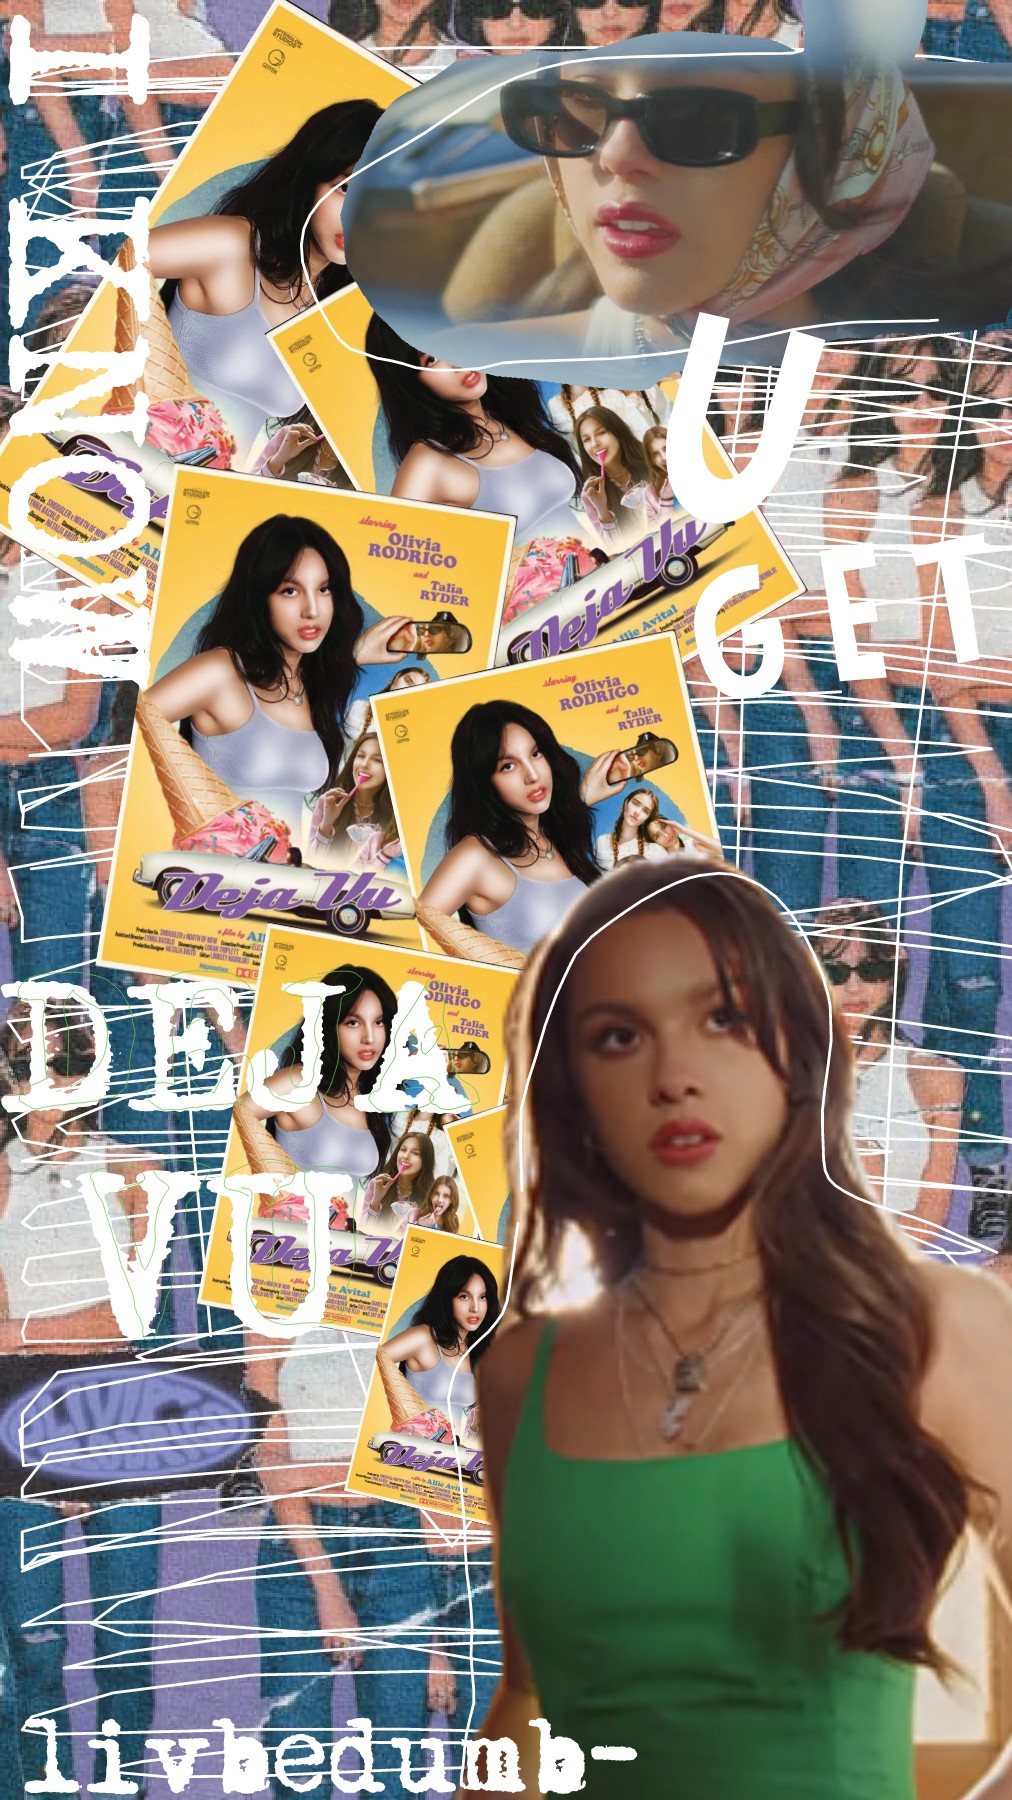 🤑 DEJA VU 🤑 (TAP)
New collage... I havent posted in a while cus its hasnt been working...
anywho
do you guys even like me collages? they're different but idk
comment or remix below